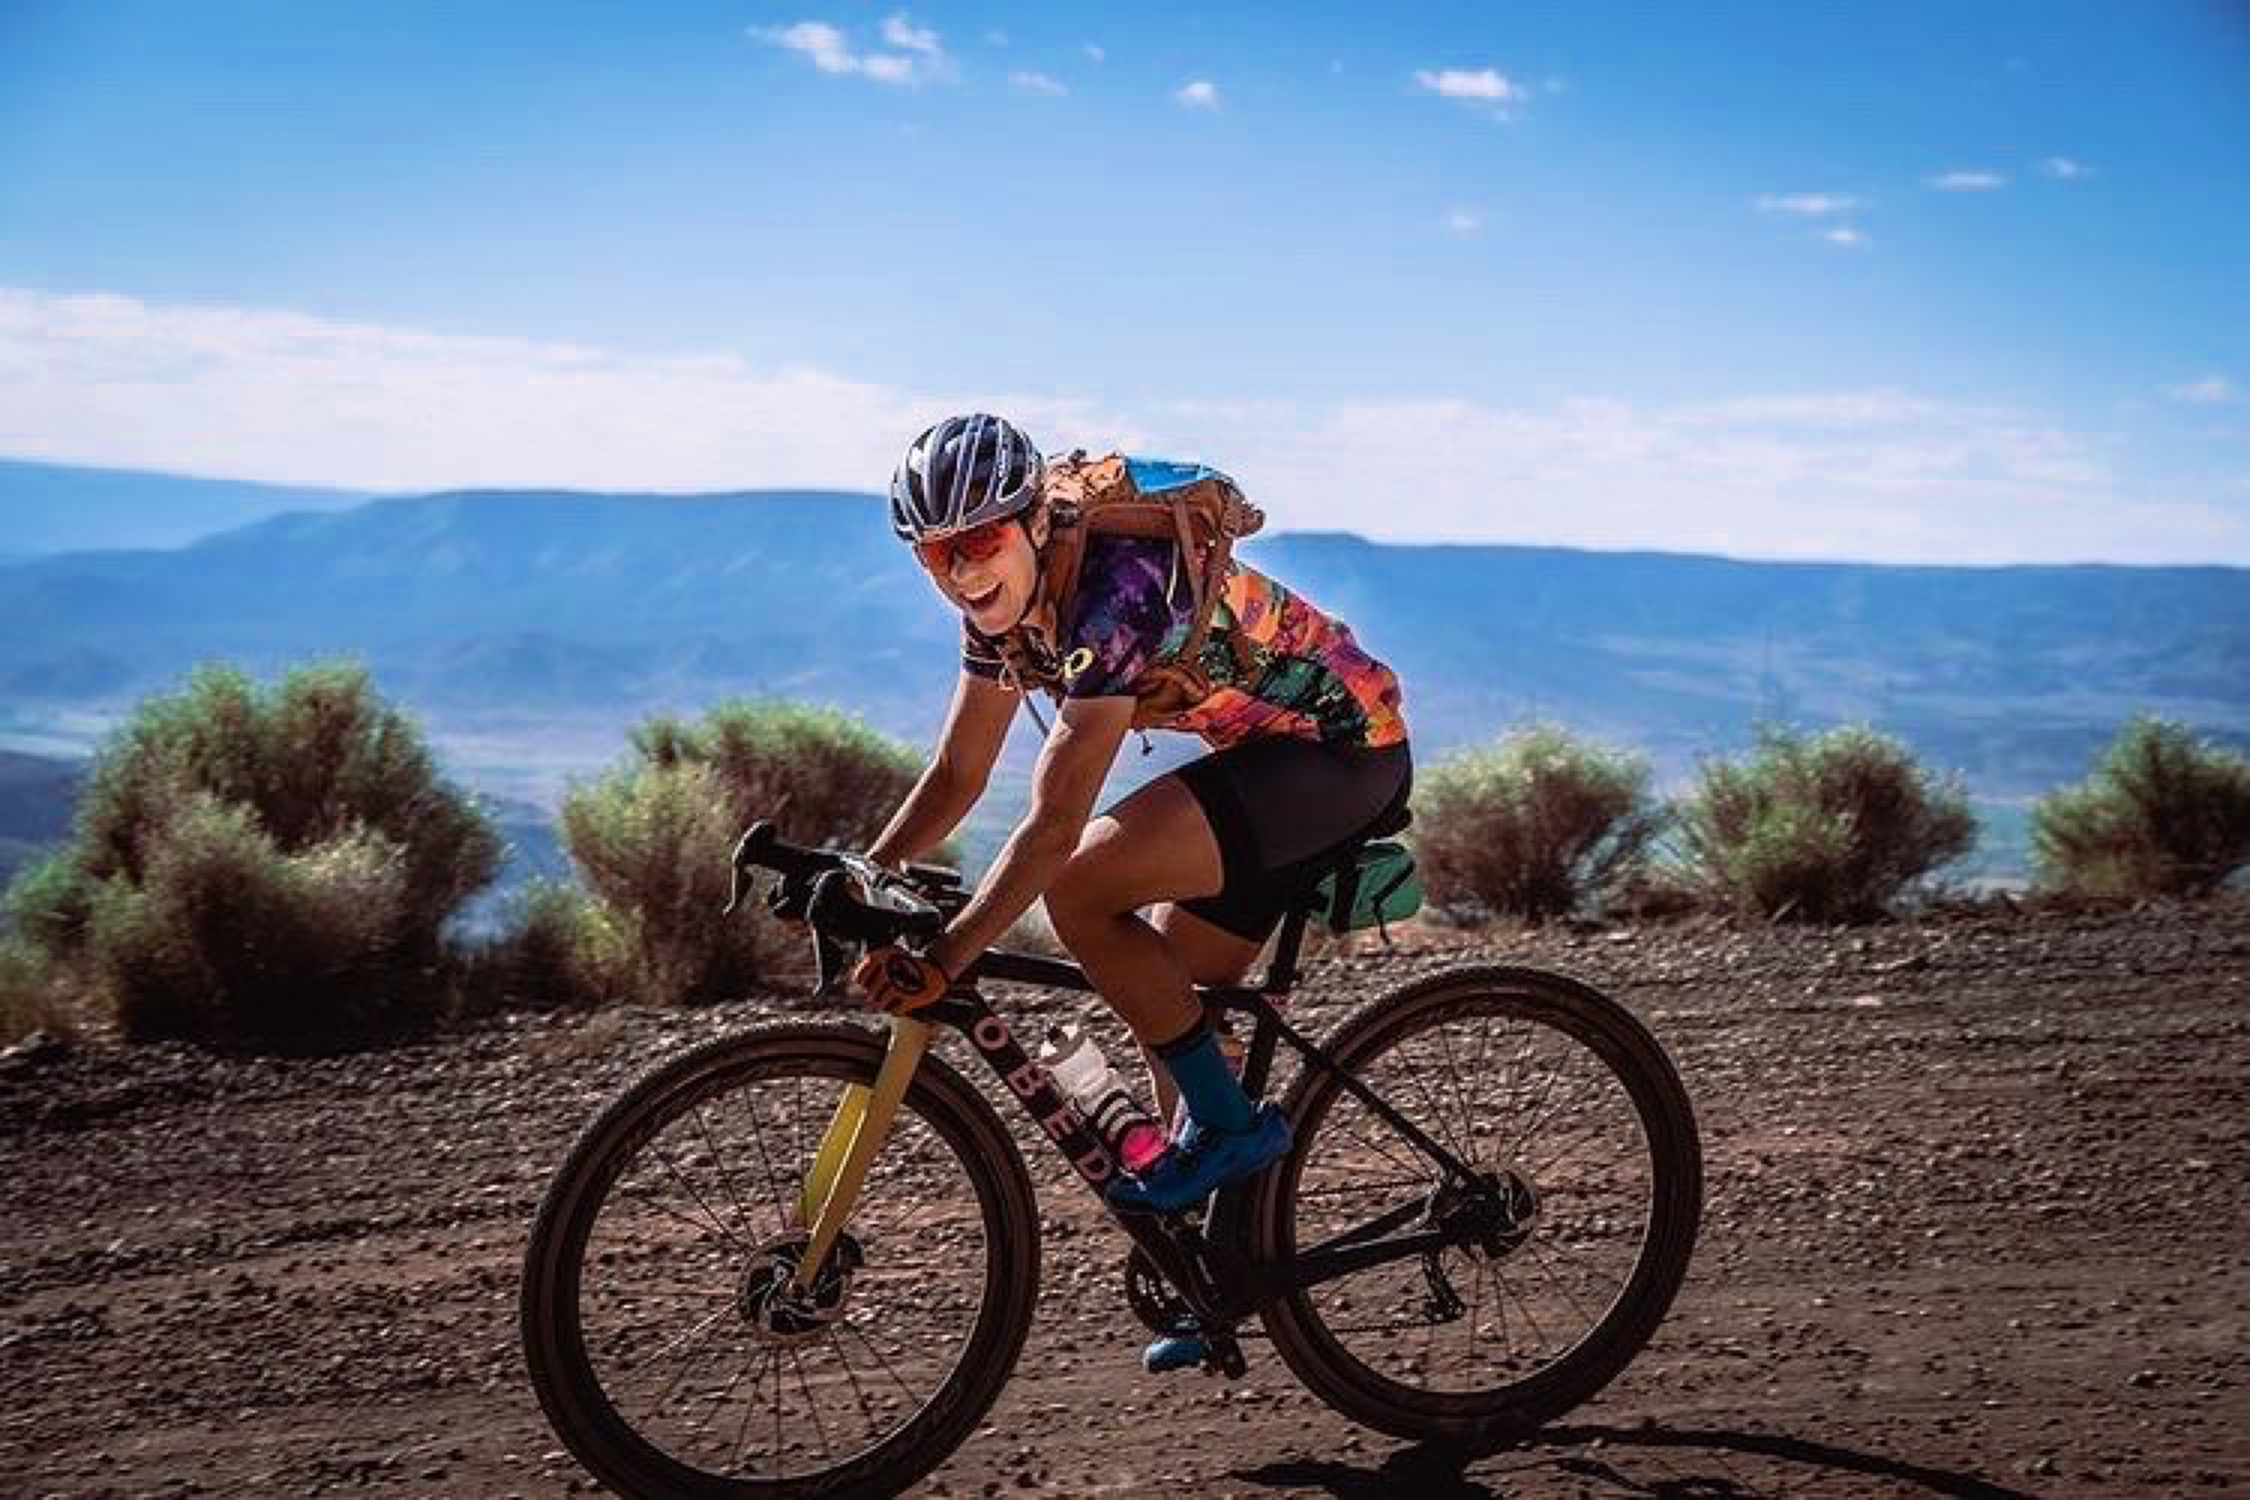 Pro triathlete turned pro MTB/gravel racer, Angela Naeth, shares how off-road cycling is the perfect complementary sport for triathletes